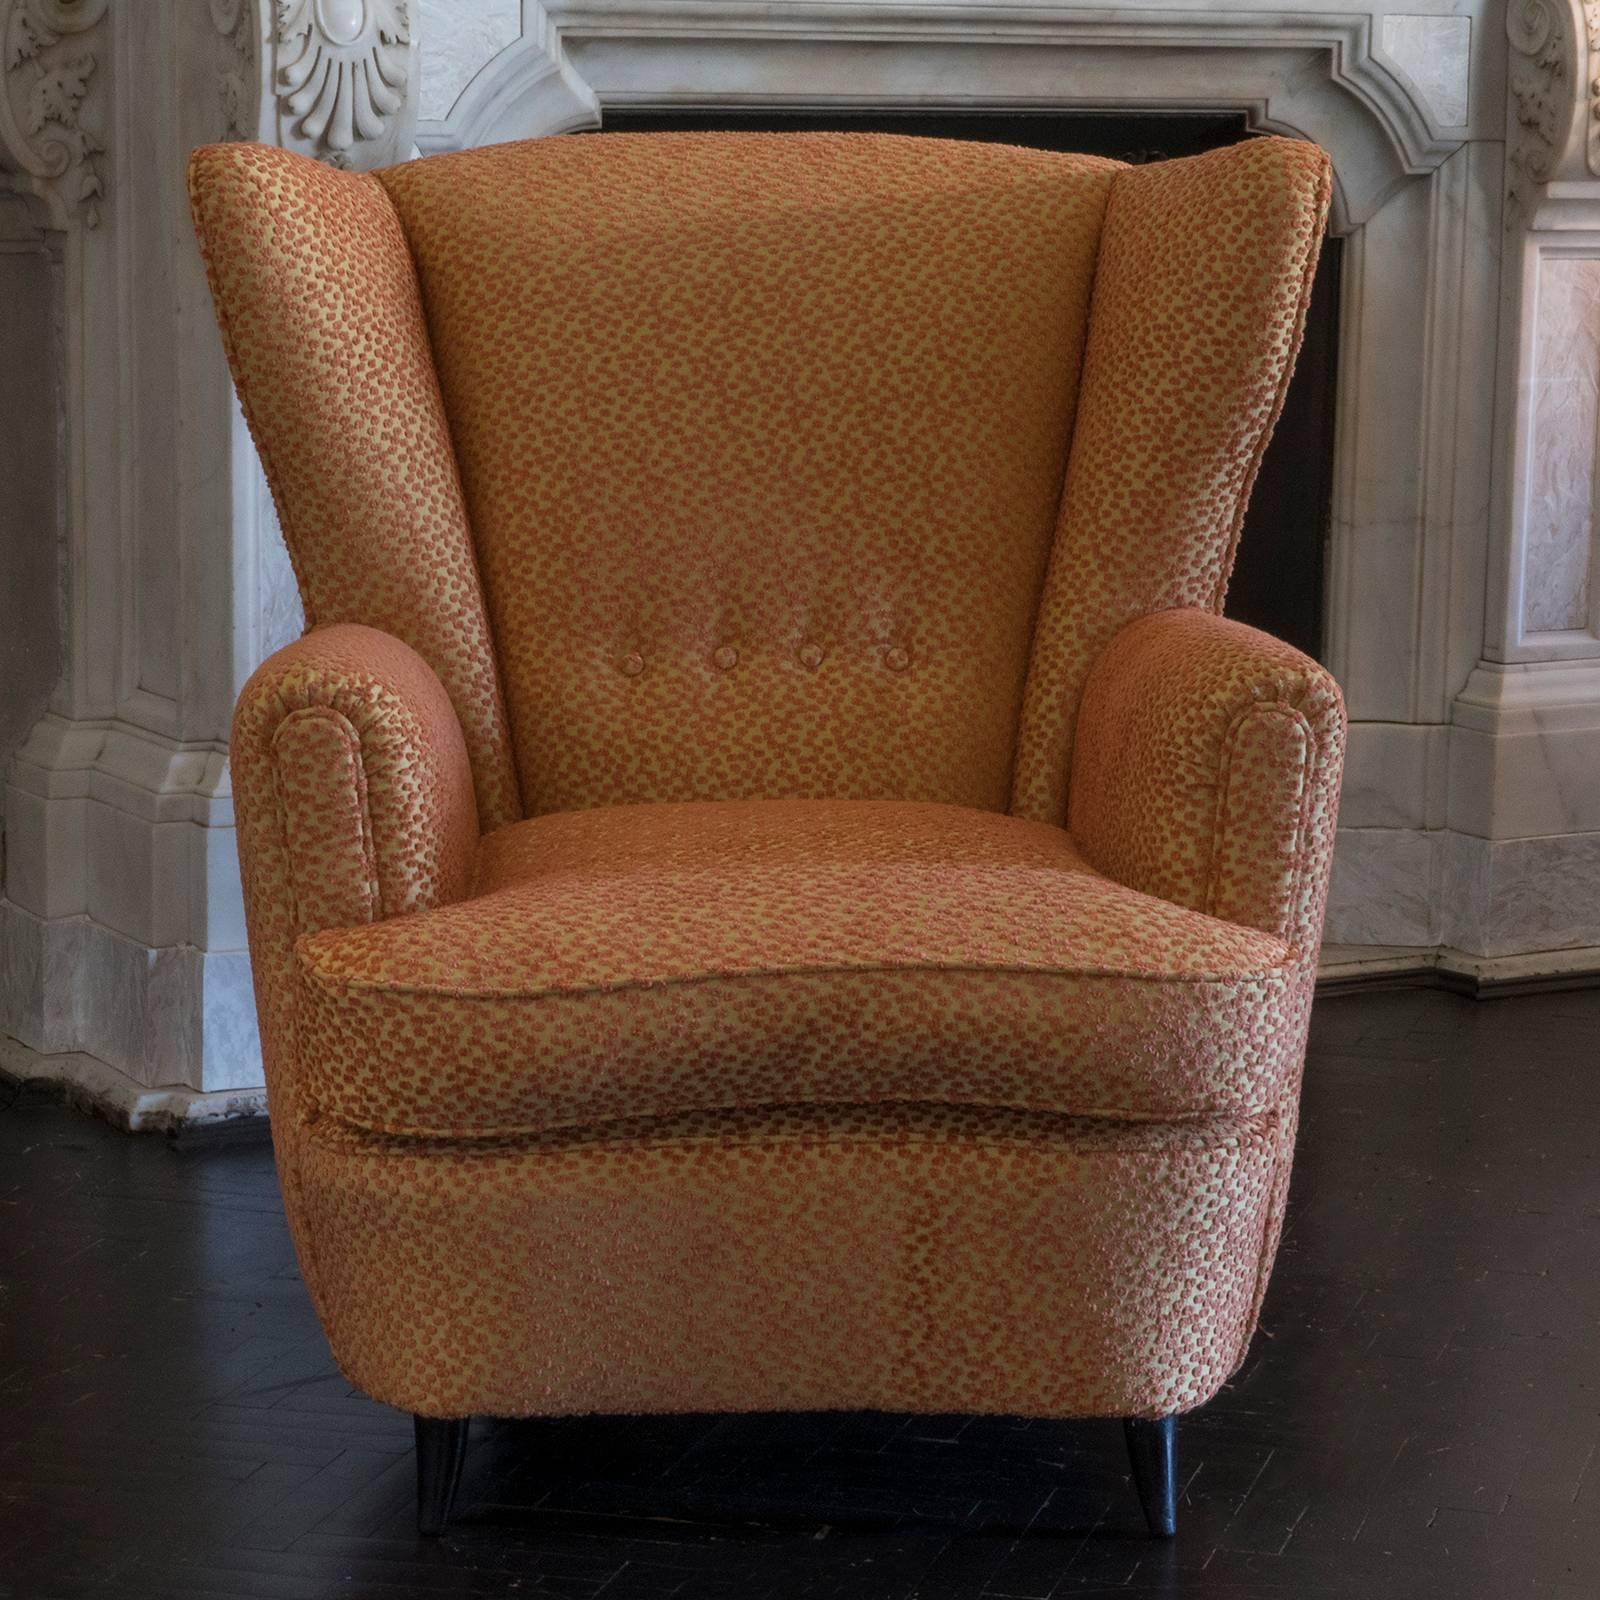 Pair of contemporary armchairs in the style of Paolo Buffa, upholstered in cotton orange polka dot fabric.